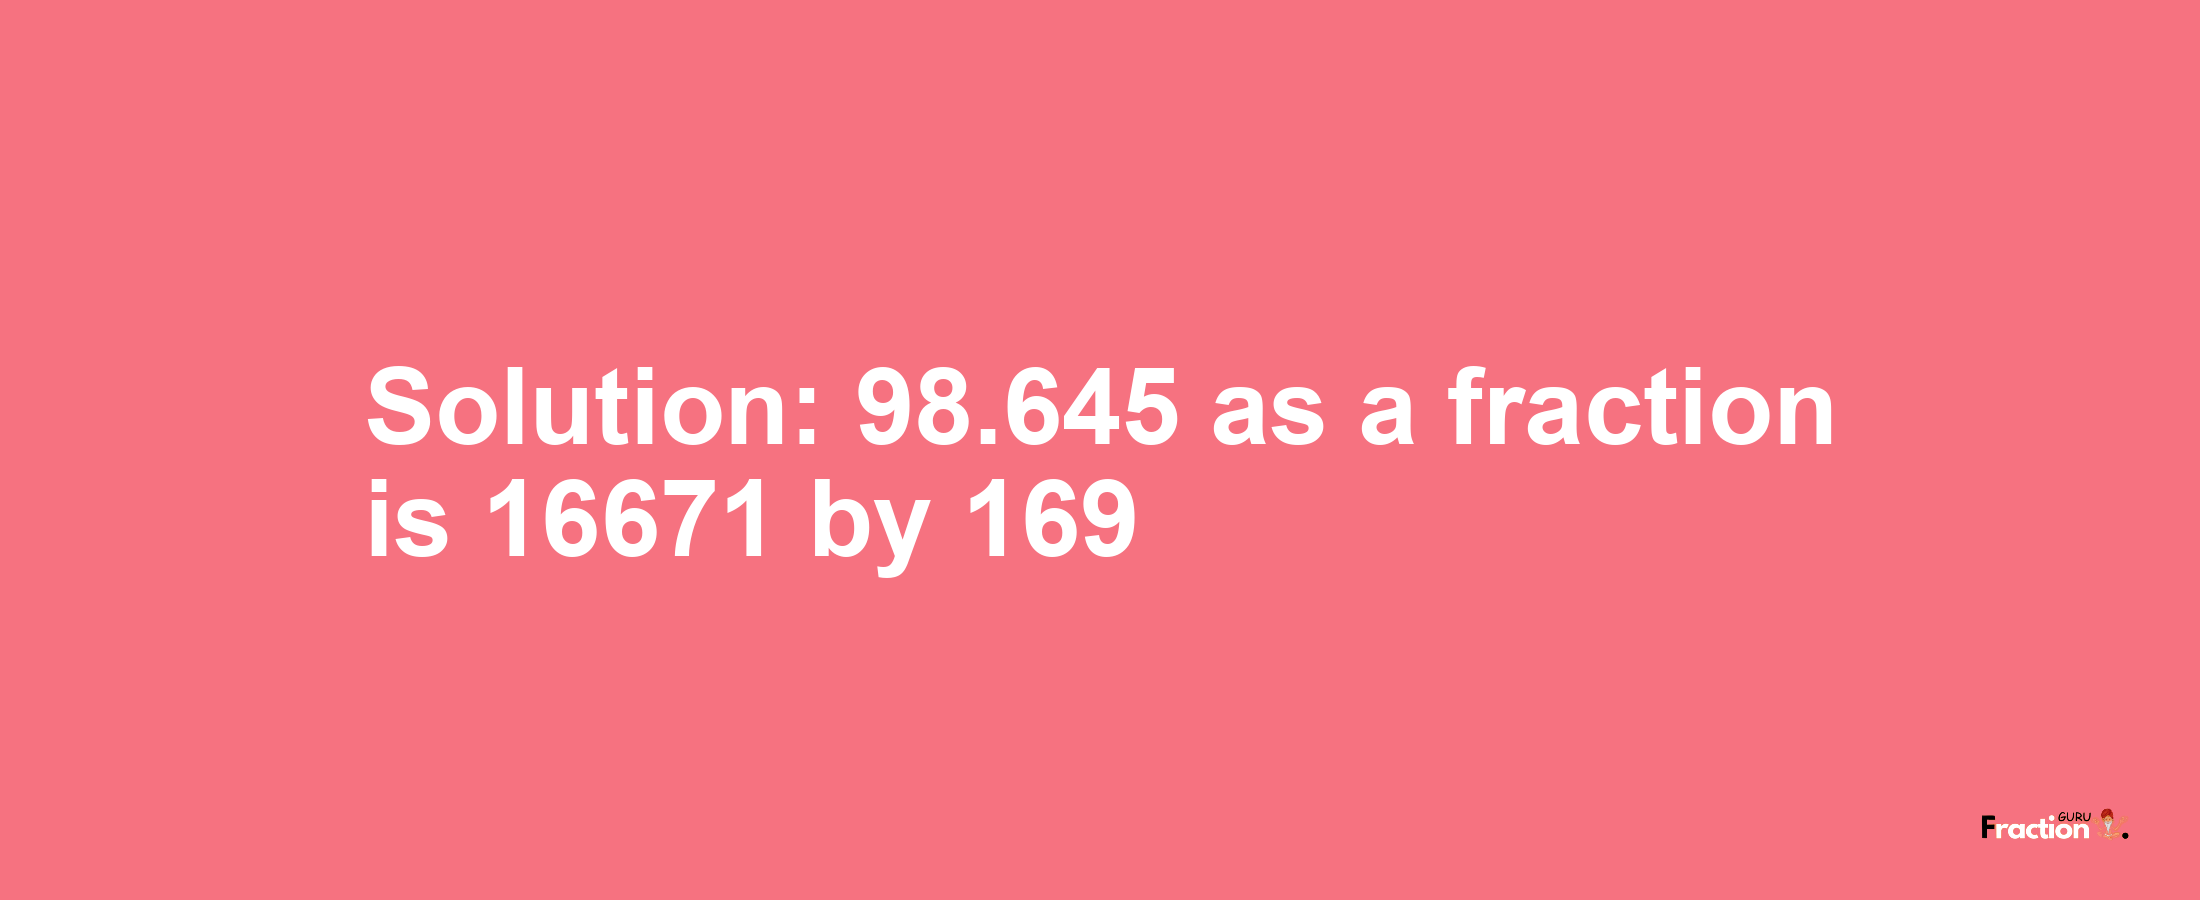 Solution:98.645 as a fraction is 16671/169